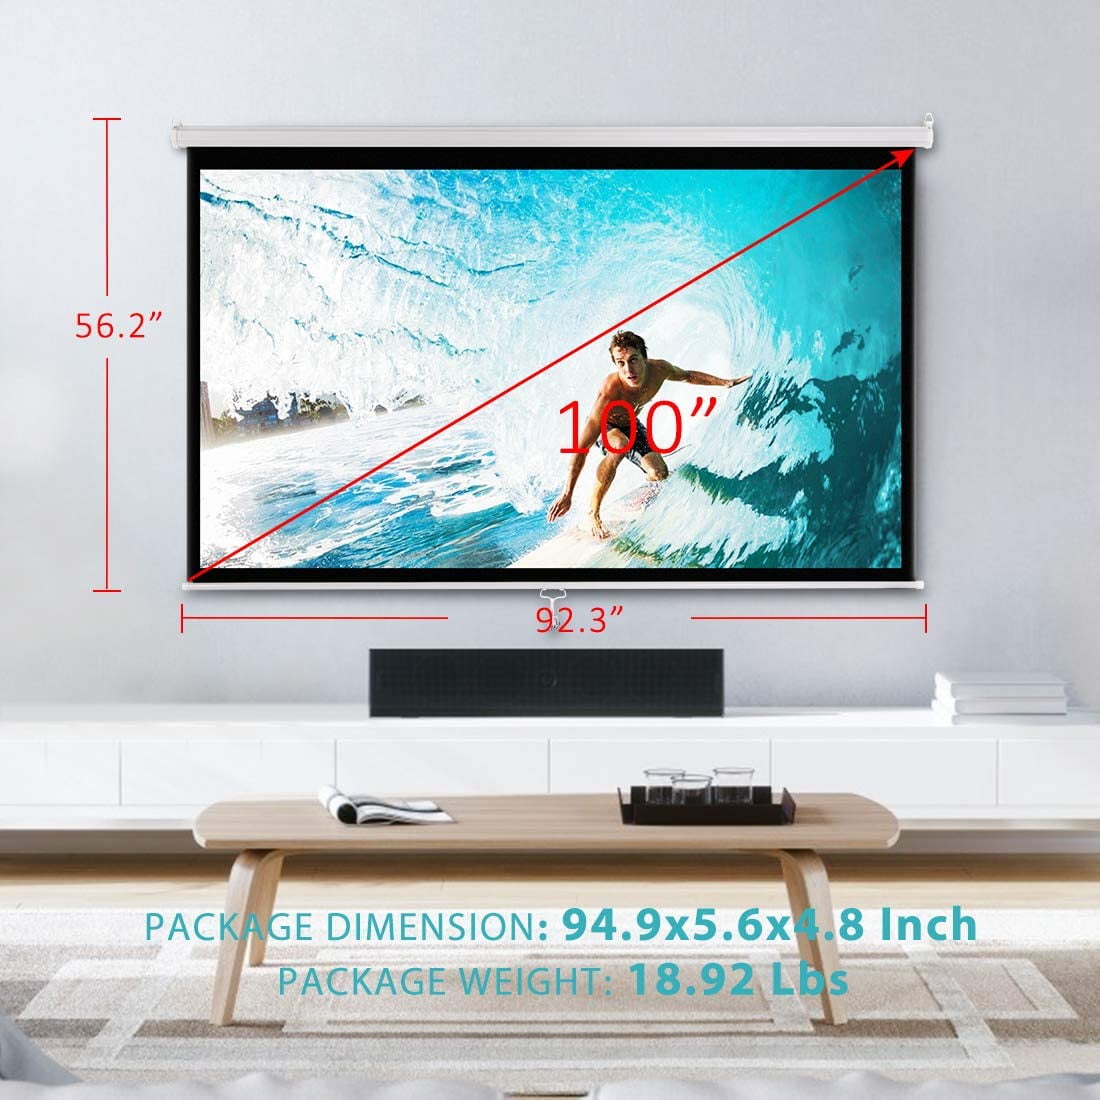 VIVOHOME 80 Inch Manual Pull Down Projector Screen 16:9 HD Retractable Widescreen Matte for Movie Home Theater Cinema Office Video Game 